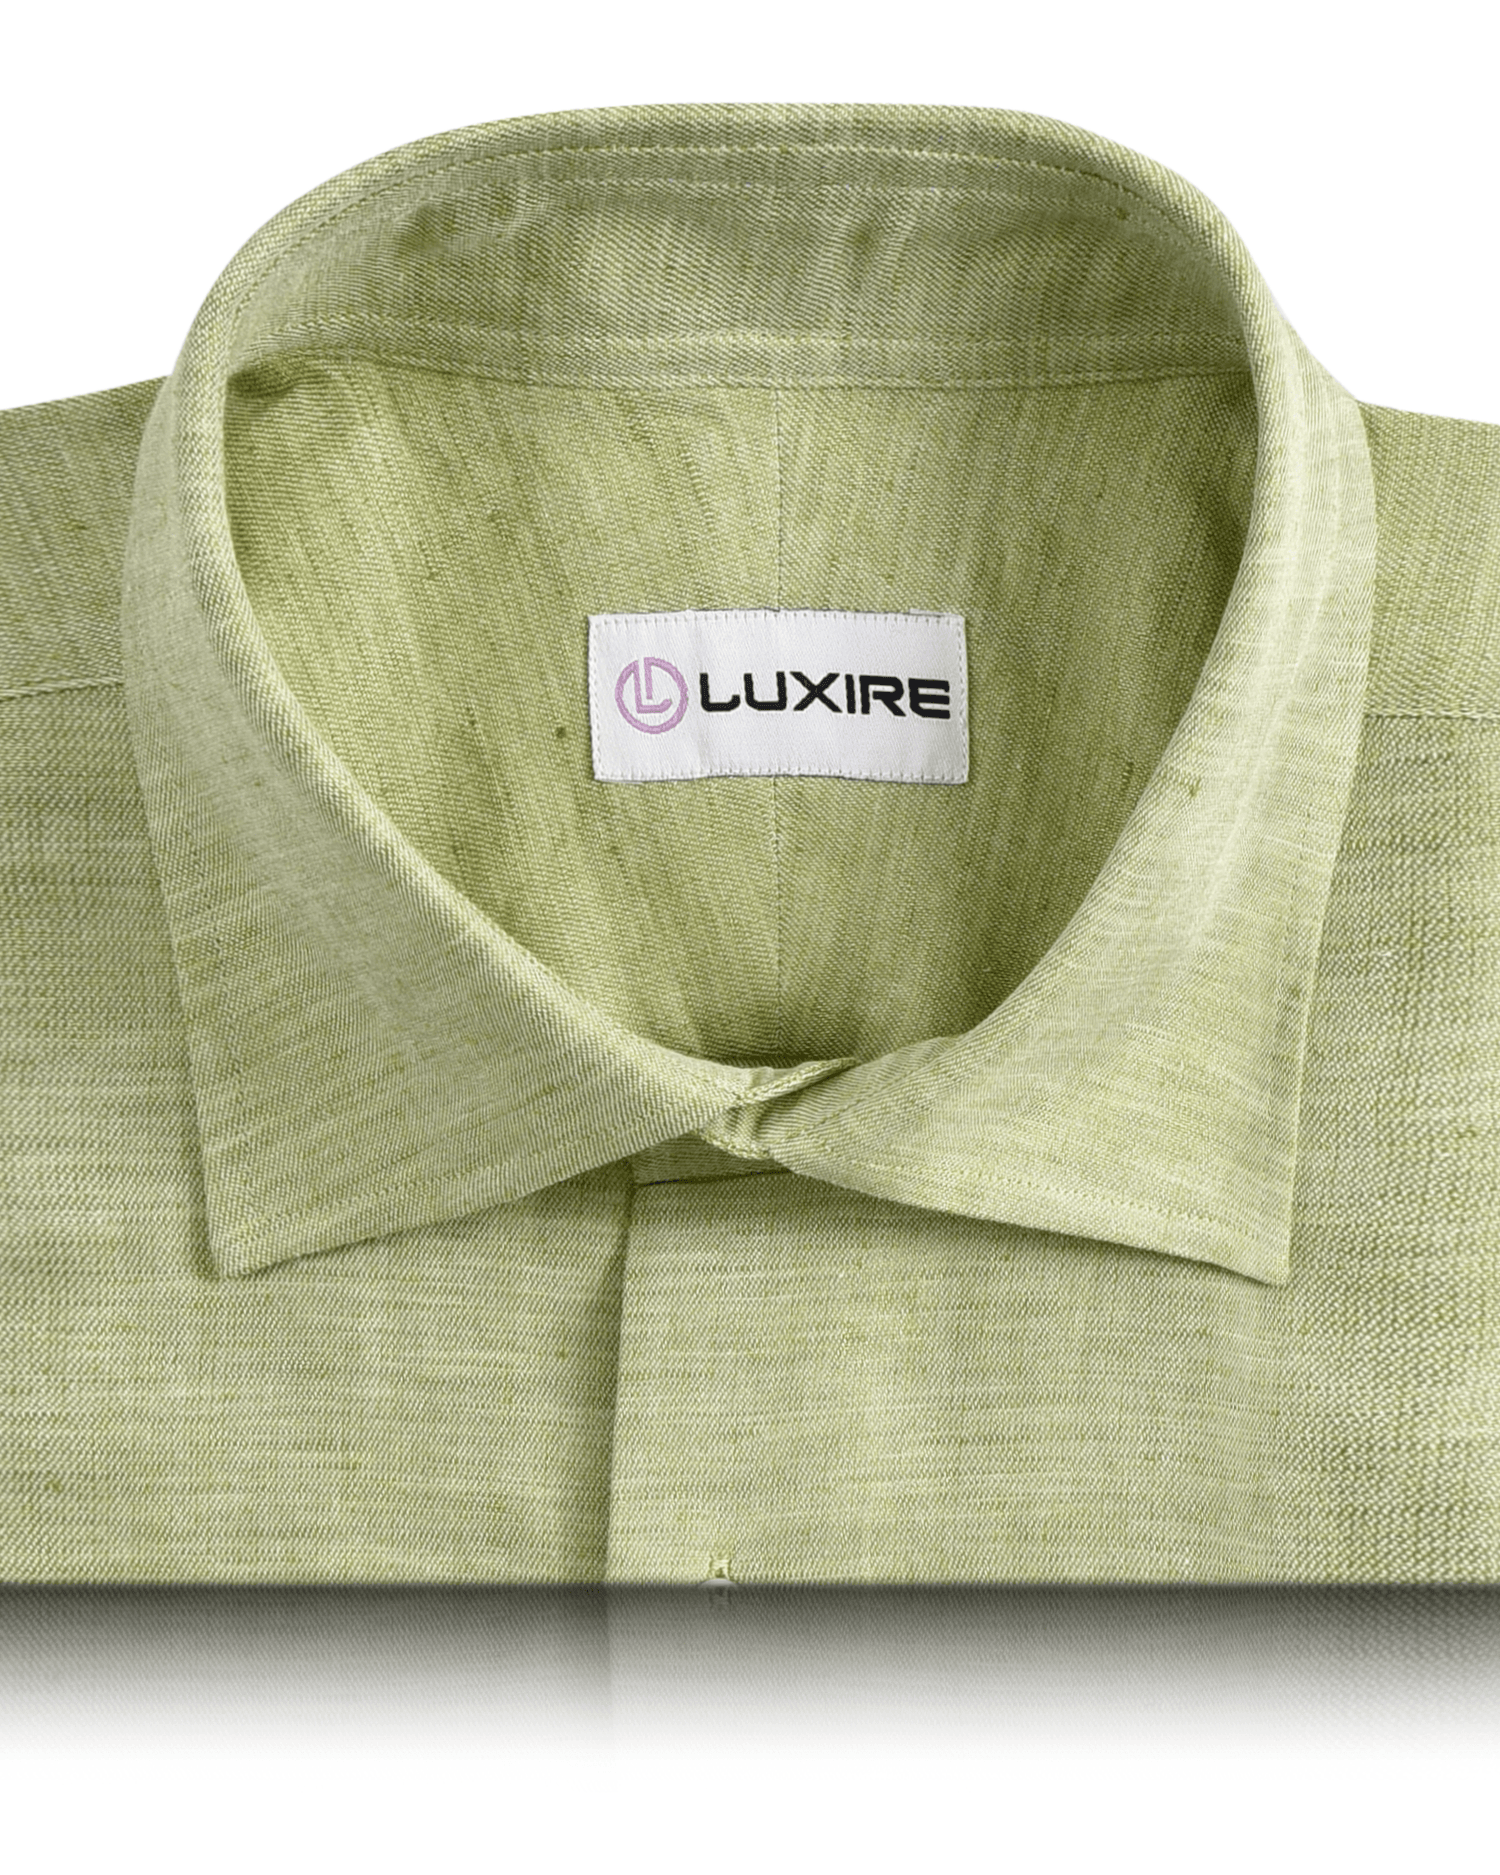 Collar of the custom linen shirt for men in light green chambray by Luxire Clothing